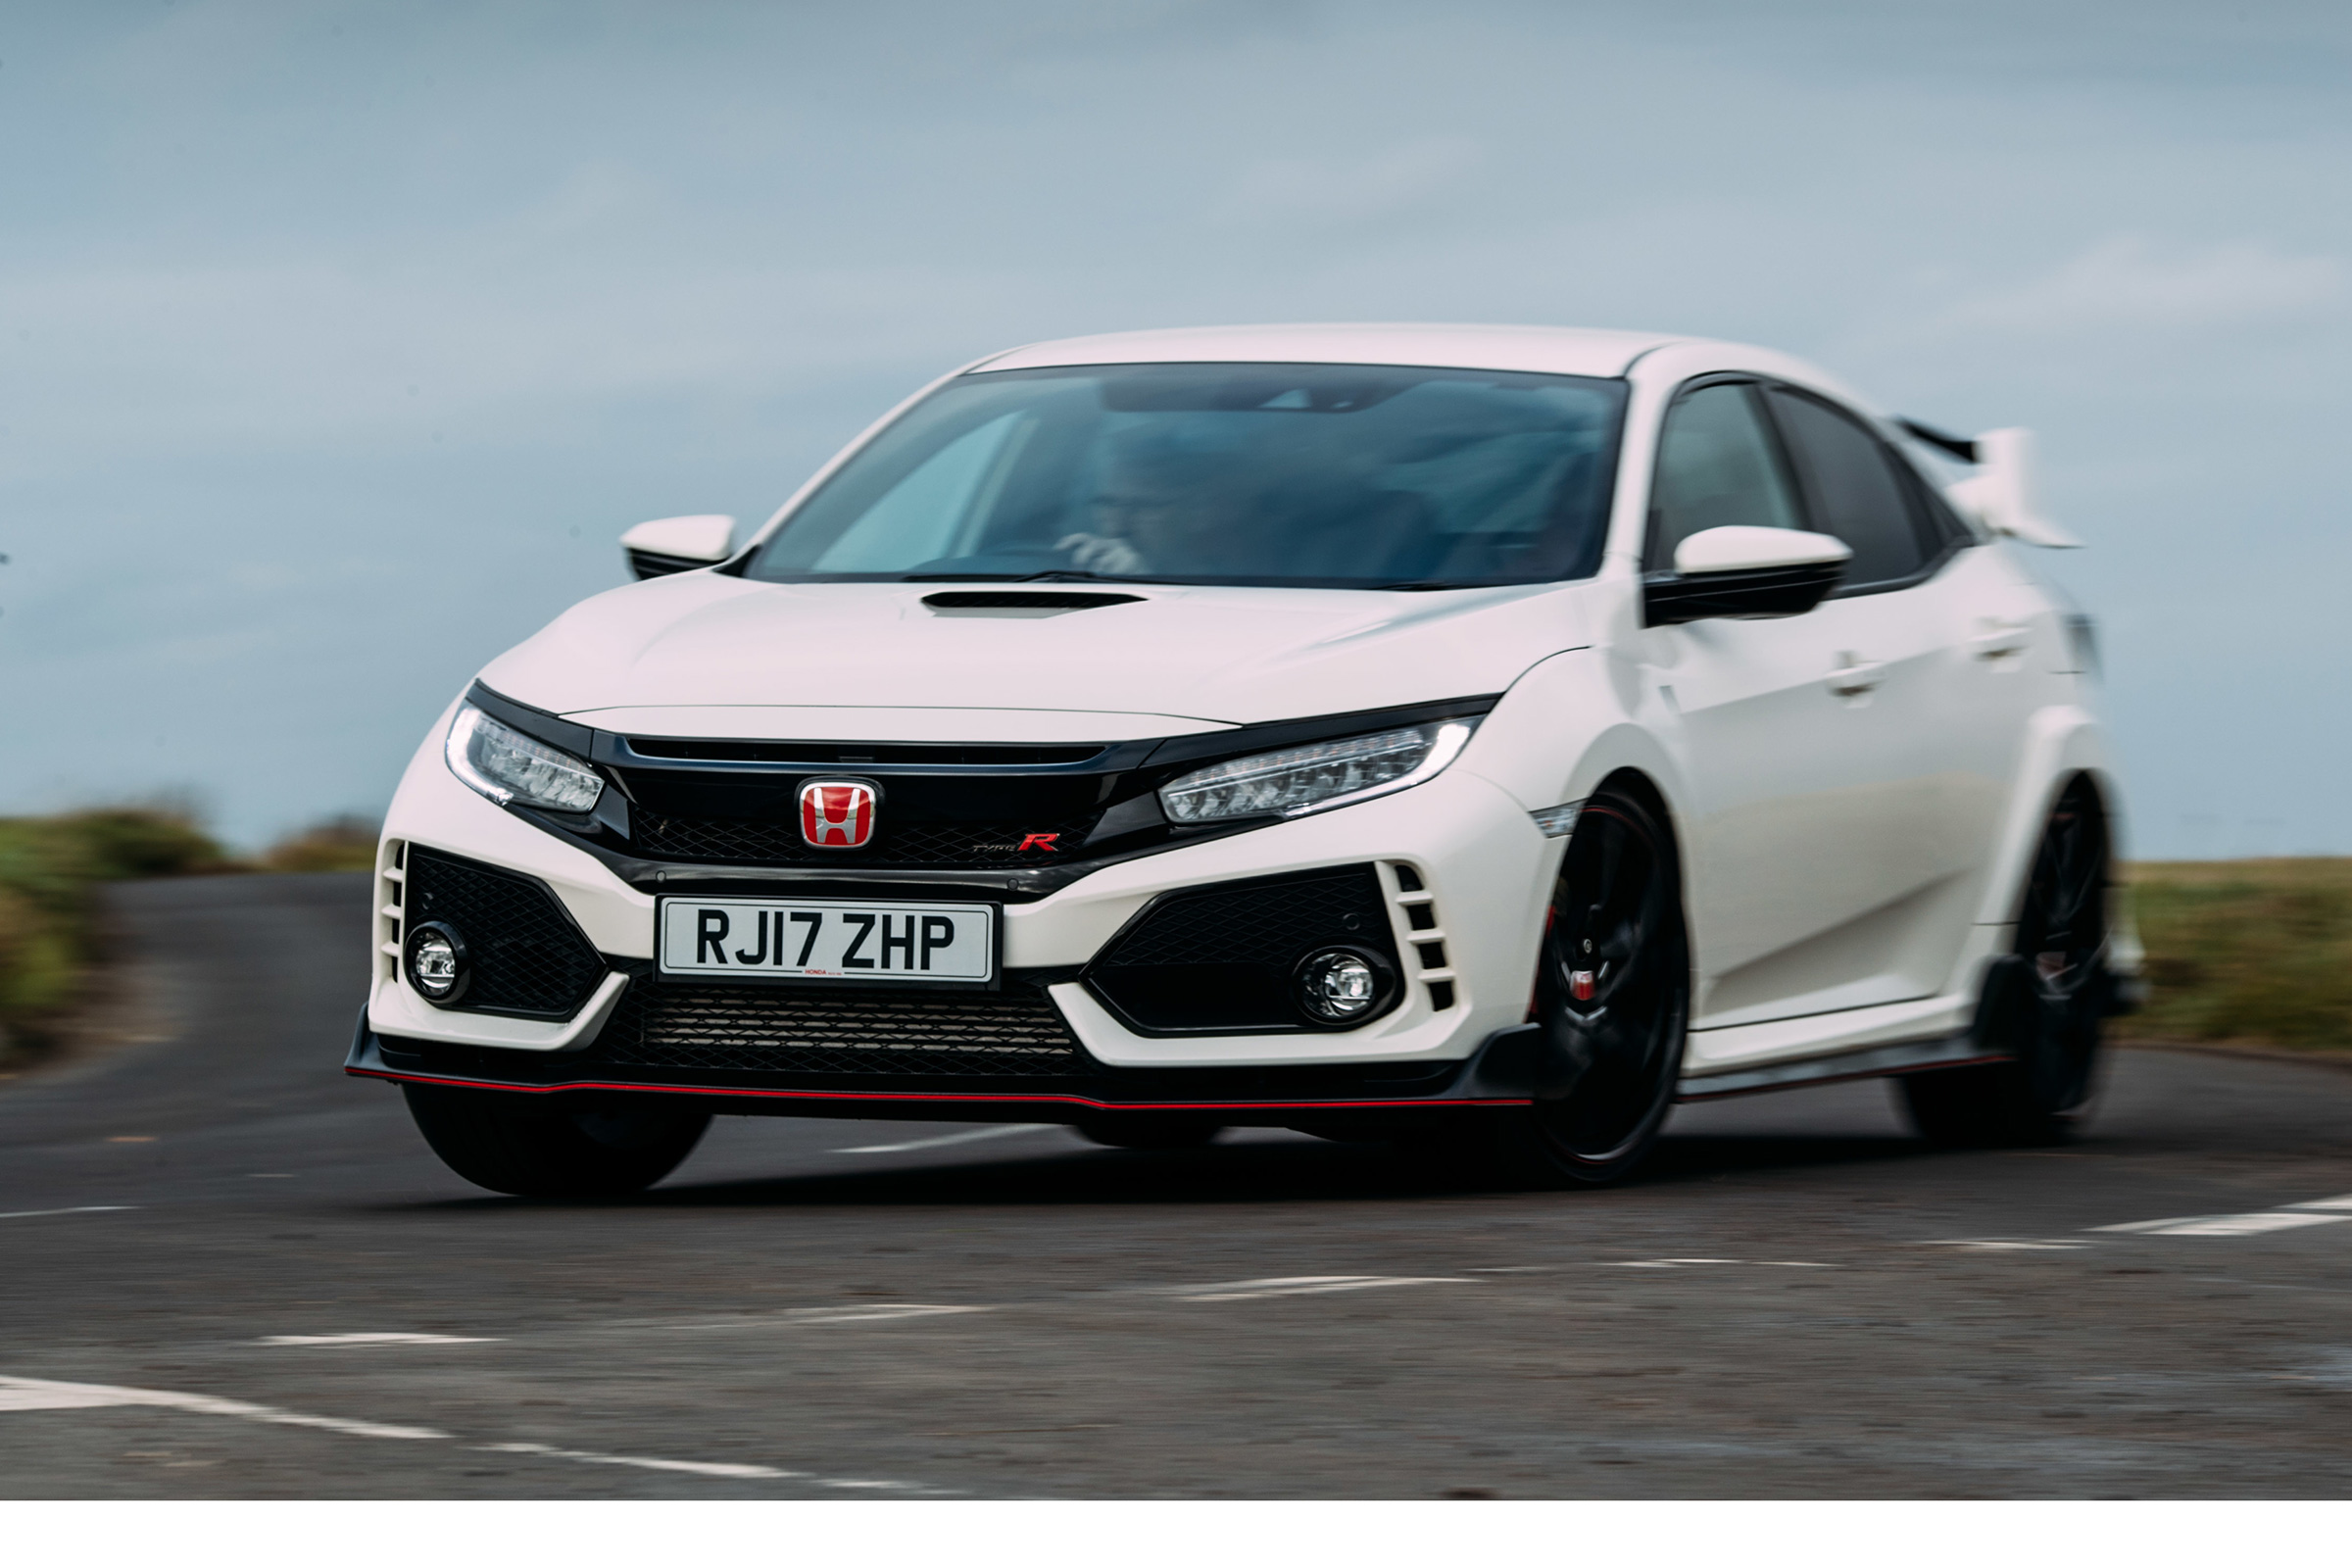 Honda Civic Type R Review Ignore The Looks This Is An